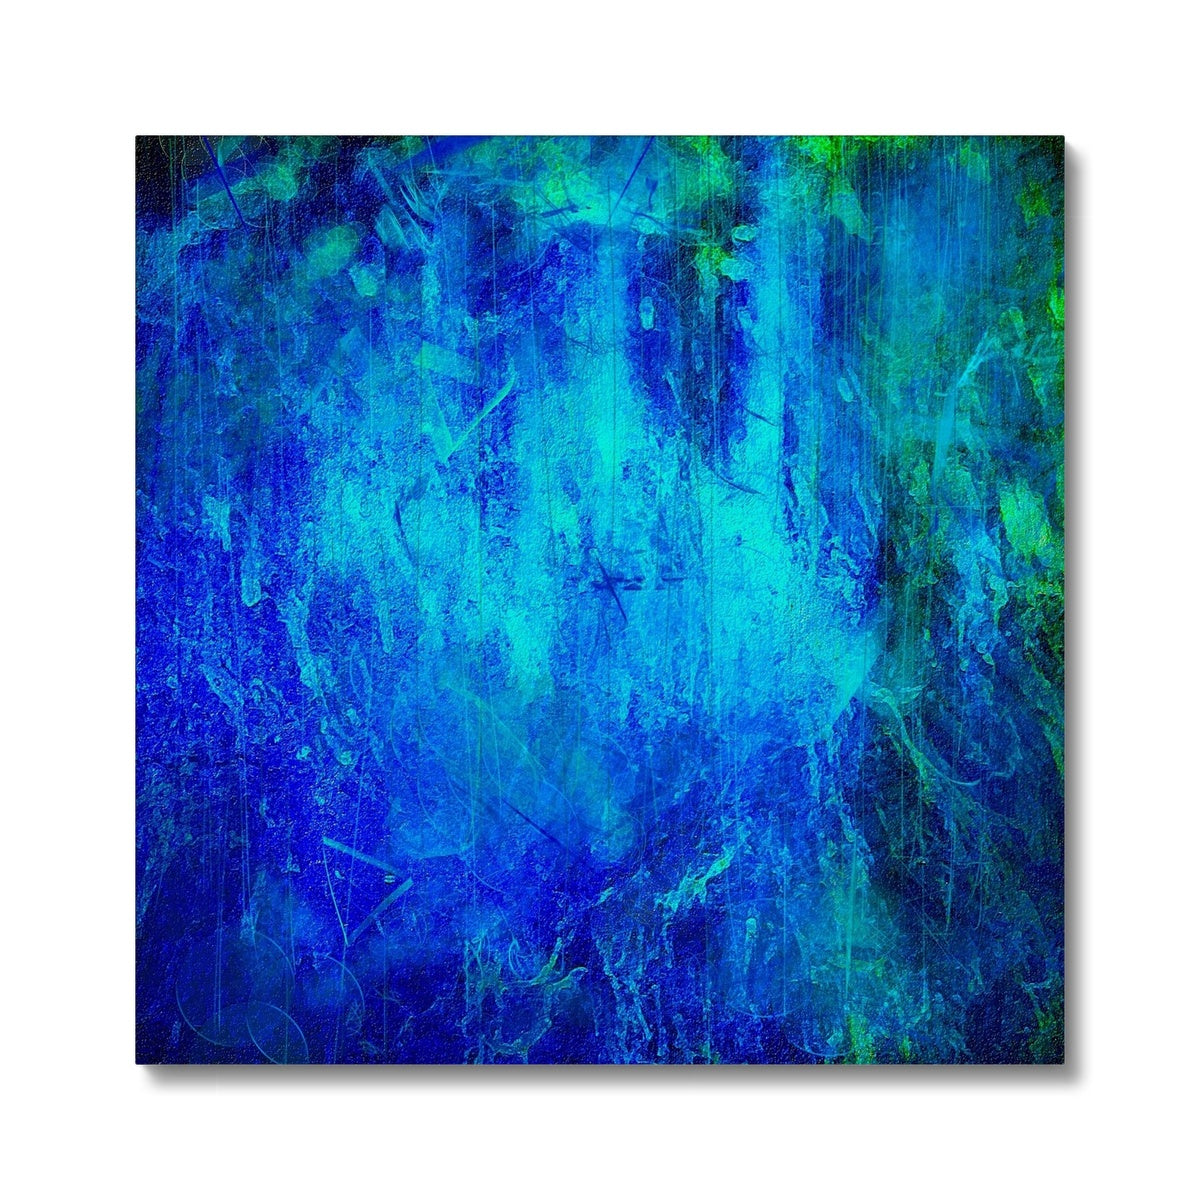 The Waterfall Abstract Painting | Canvas From Scotland-Contemporary Stretched Canvas Prints-Abstract & Impressionistic Art Gallery-24"x24"-Paintings, Prints, Homeware, Art Gifts From Scotland By Scottish Artist Kevin Hunter